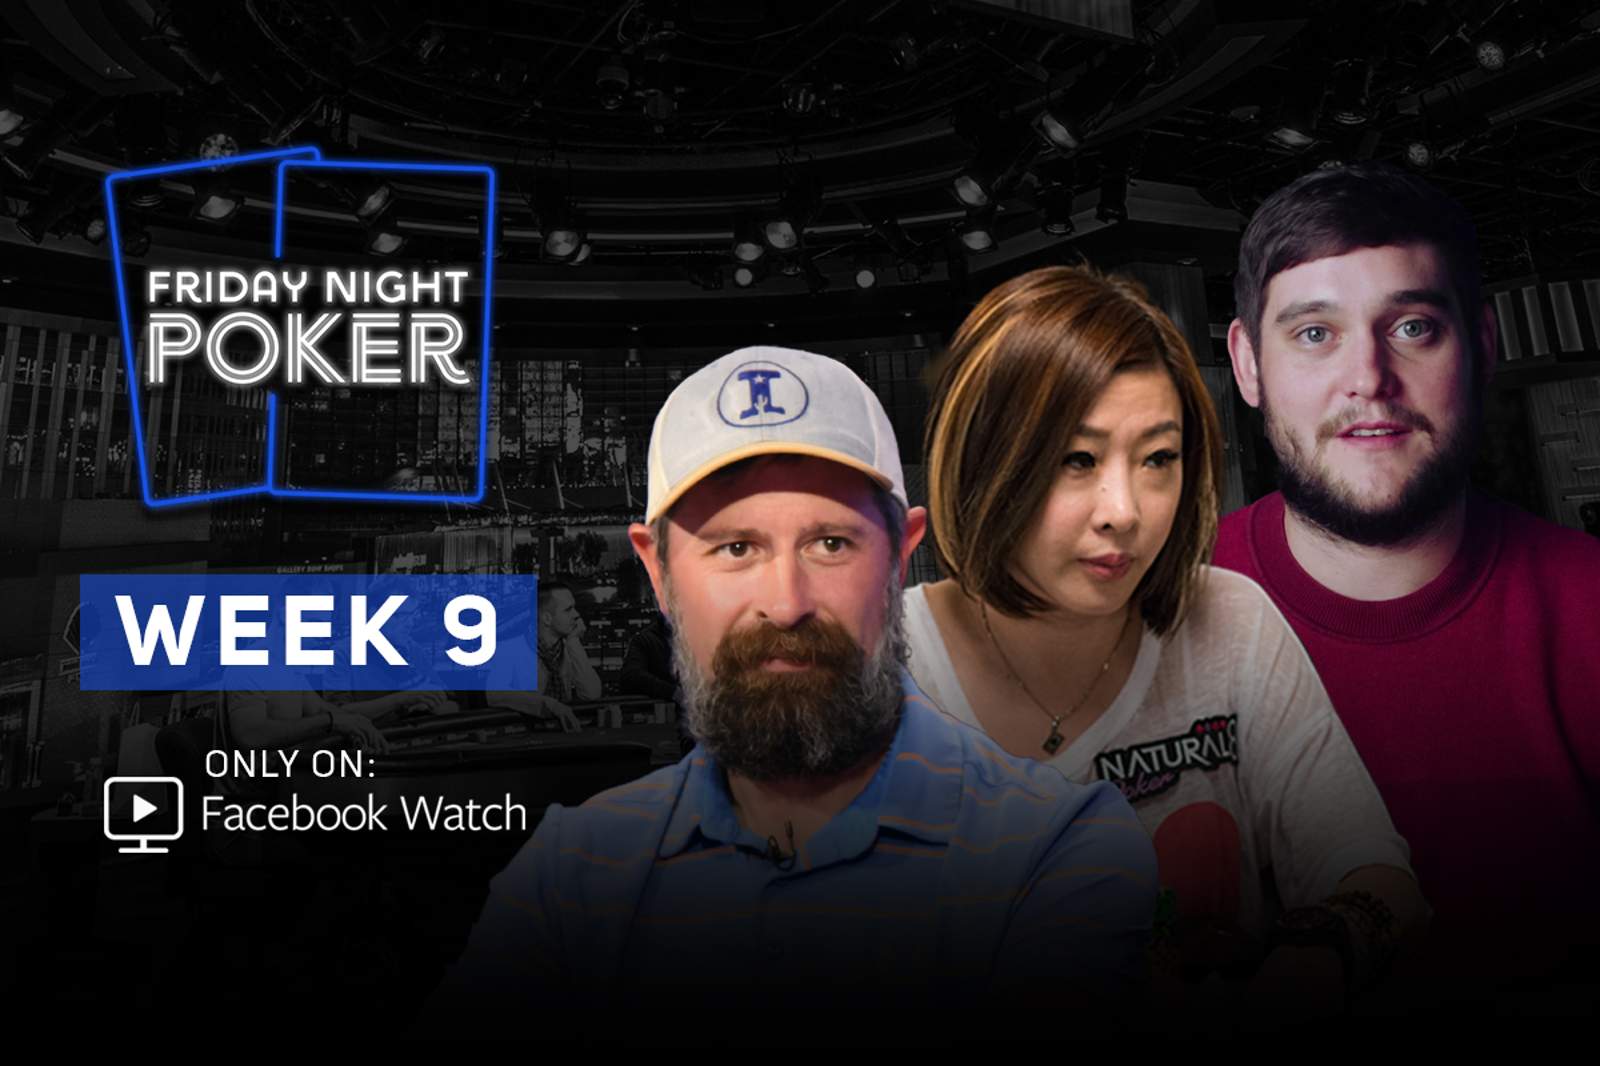 Week 9 of Friday Night Poker Headlines by Piccioli, Young and Kitty Kuo